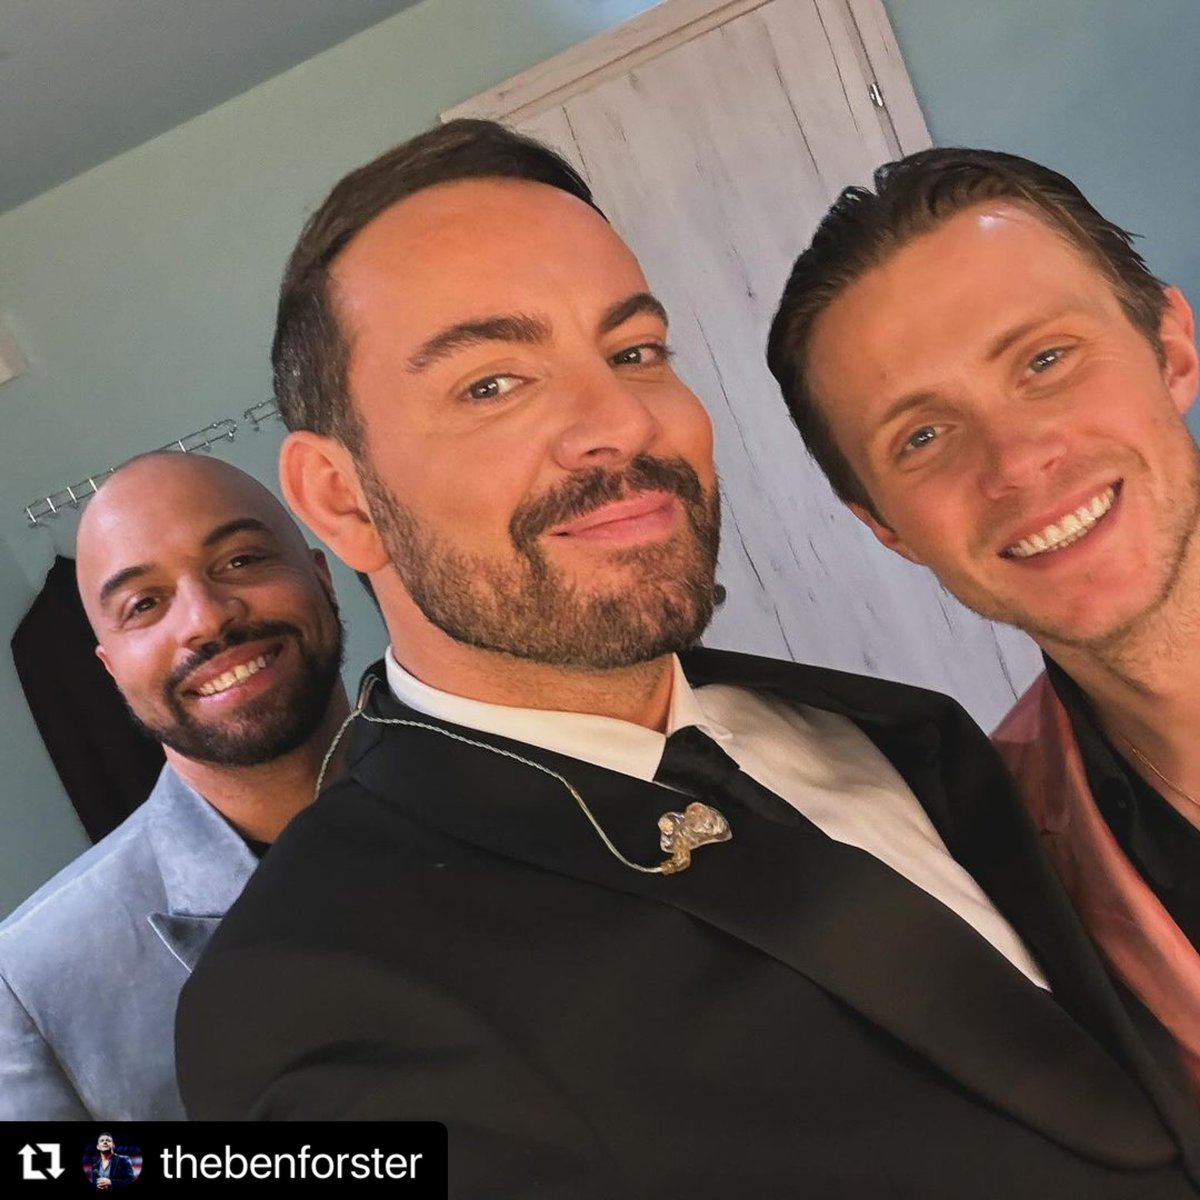 #Repost @thebenforster ・・・ From Ben’s IG: Photo drop of my great Christmas in Greece. I had such fun with this lot on and off stage . A really lovely time with @disney 100 . @thebenforster @adrianhansel @Laurensamuels88 @robhouchen @1RachelJohn